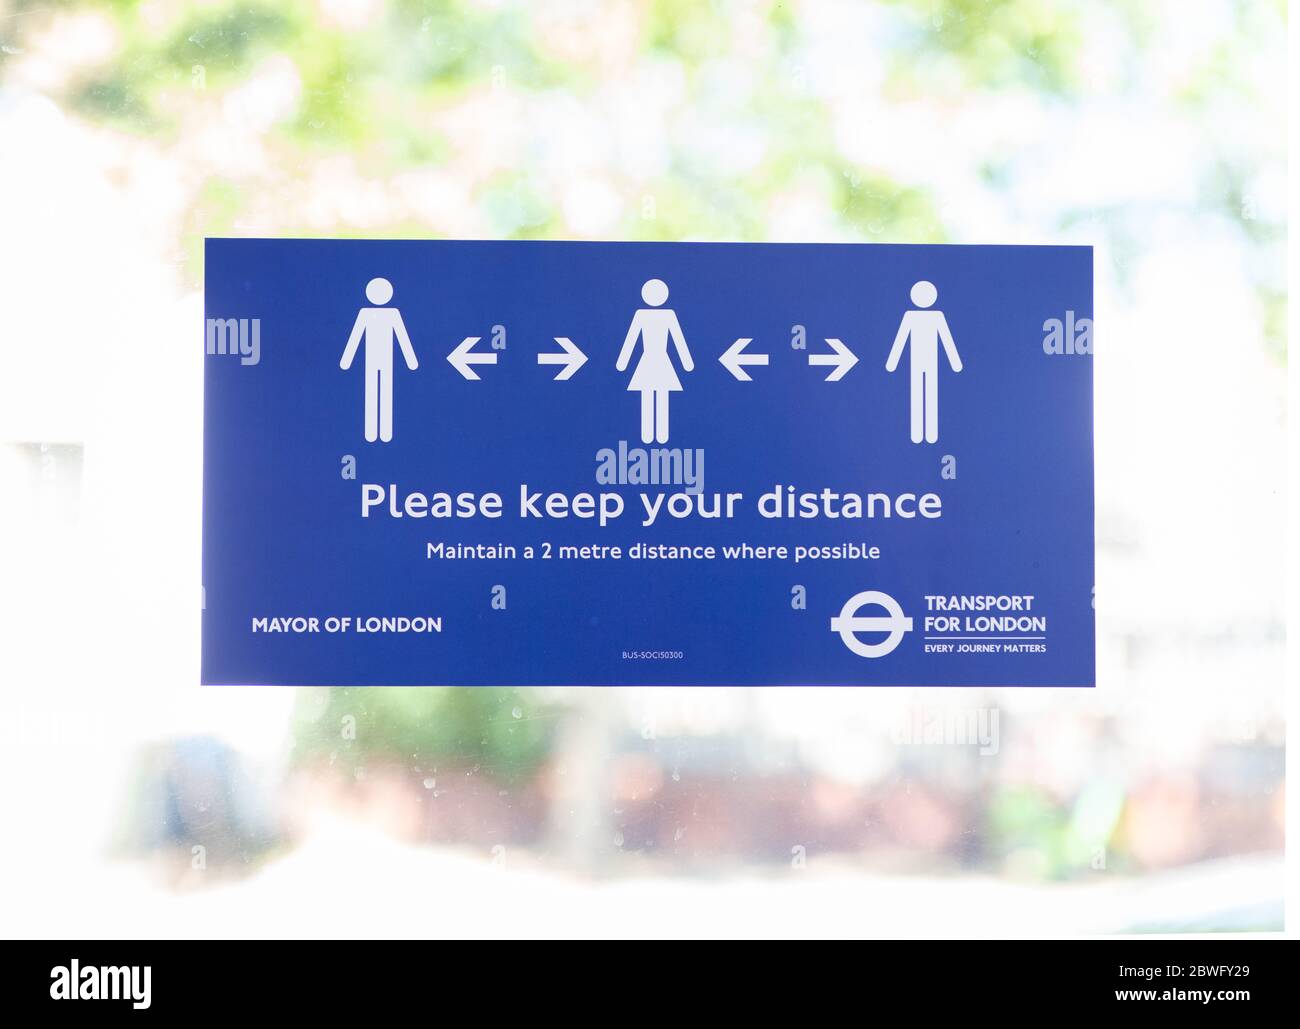 New stickers on buses remind commuters to socially distance during the COVID-19 pandemic.  Social distancing sign.  May 30, 2020. Stock Photo